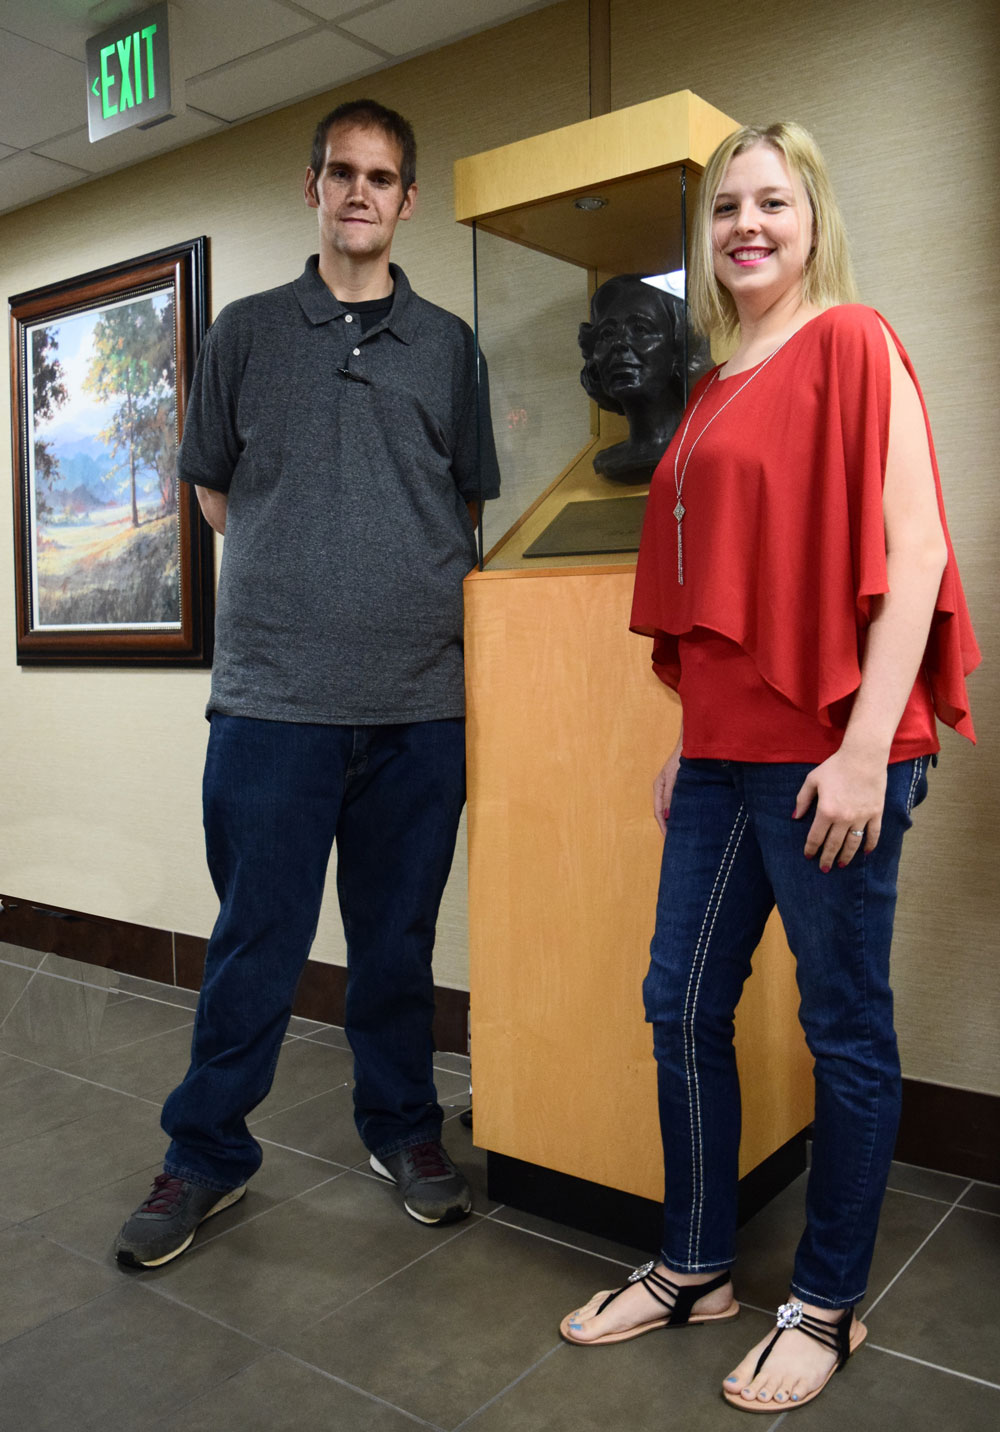 Together, Caleb and Danielle Neeley are on their way after surgeries by Jonathan Ray, MD, a bariatric surgeon at Fort Sanders Center for Bariatric Surgery.